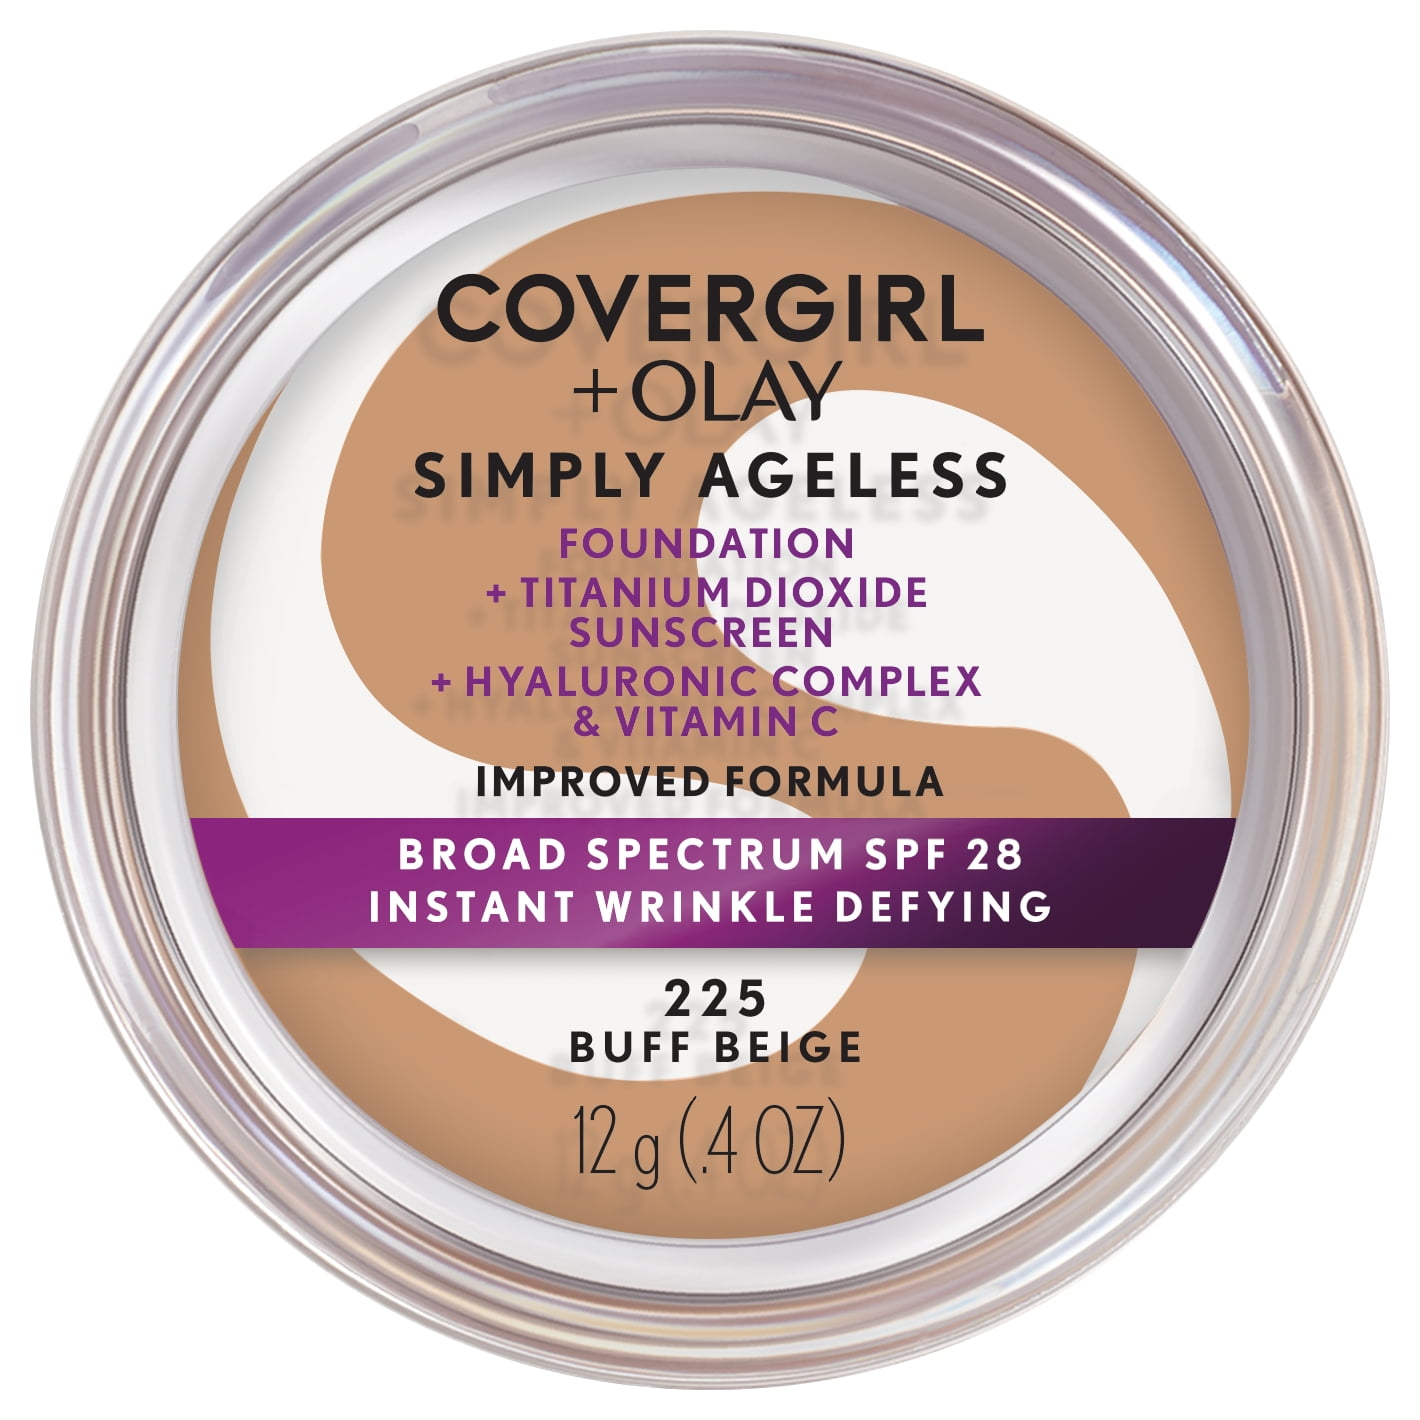 COVERGIRL + OLAY Simply Ageless Instant Wrinkle-Defying Foundation with SPF 28, Buff Beige 225, 0.44 oz, Hydrating Anti-Aging Foundation, Cruelty-Free Foundation, Hyaluronic Complex for Firm Skin